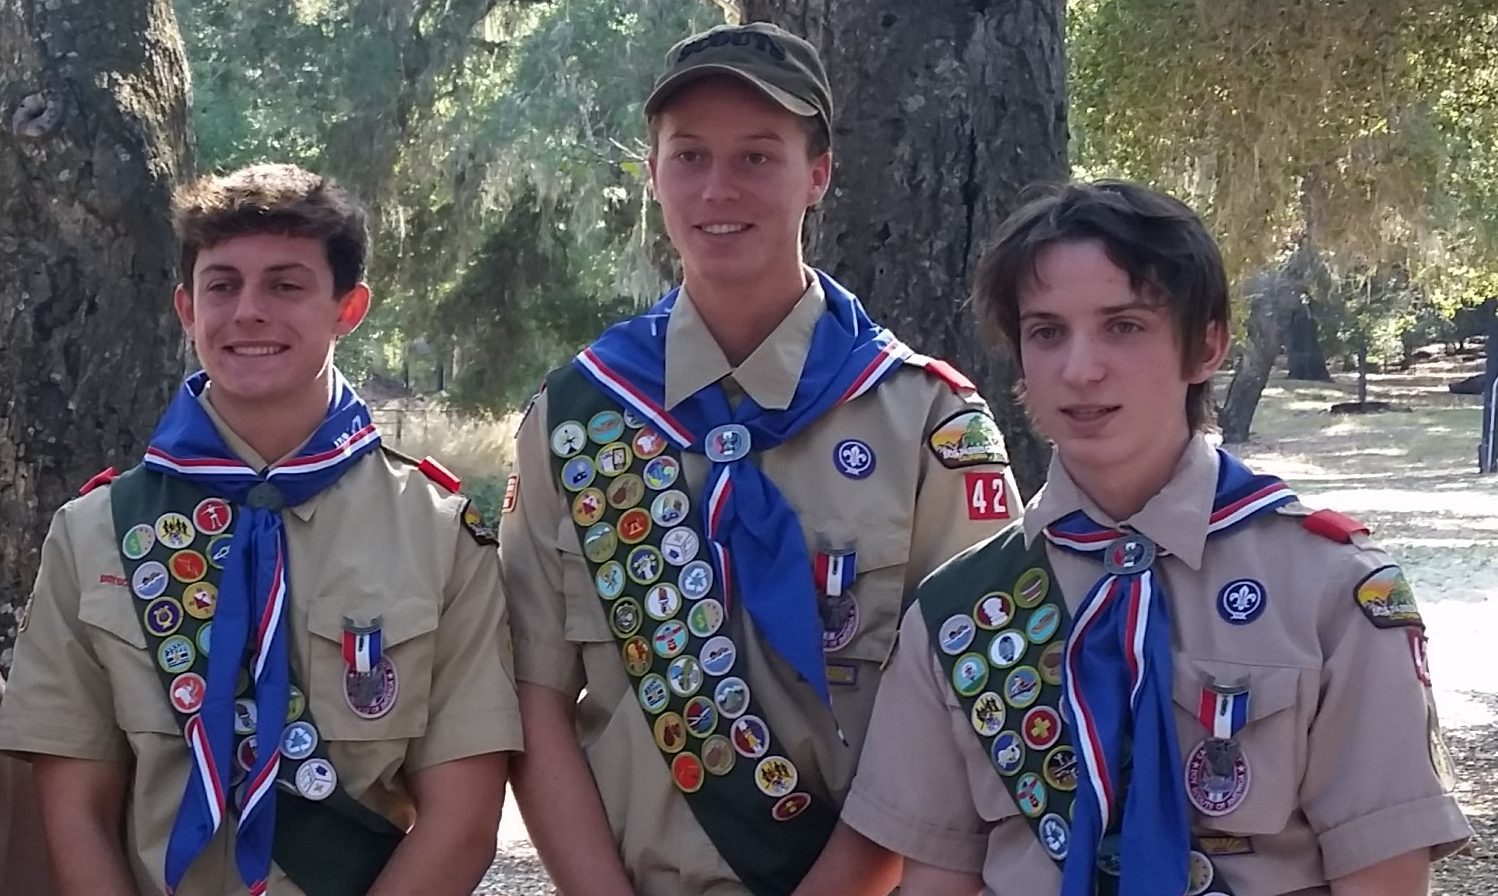 Los Padres Council of Boy Scouts Prepared to Help Those in Need